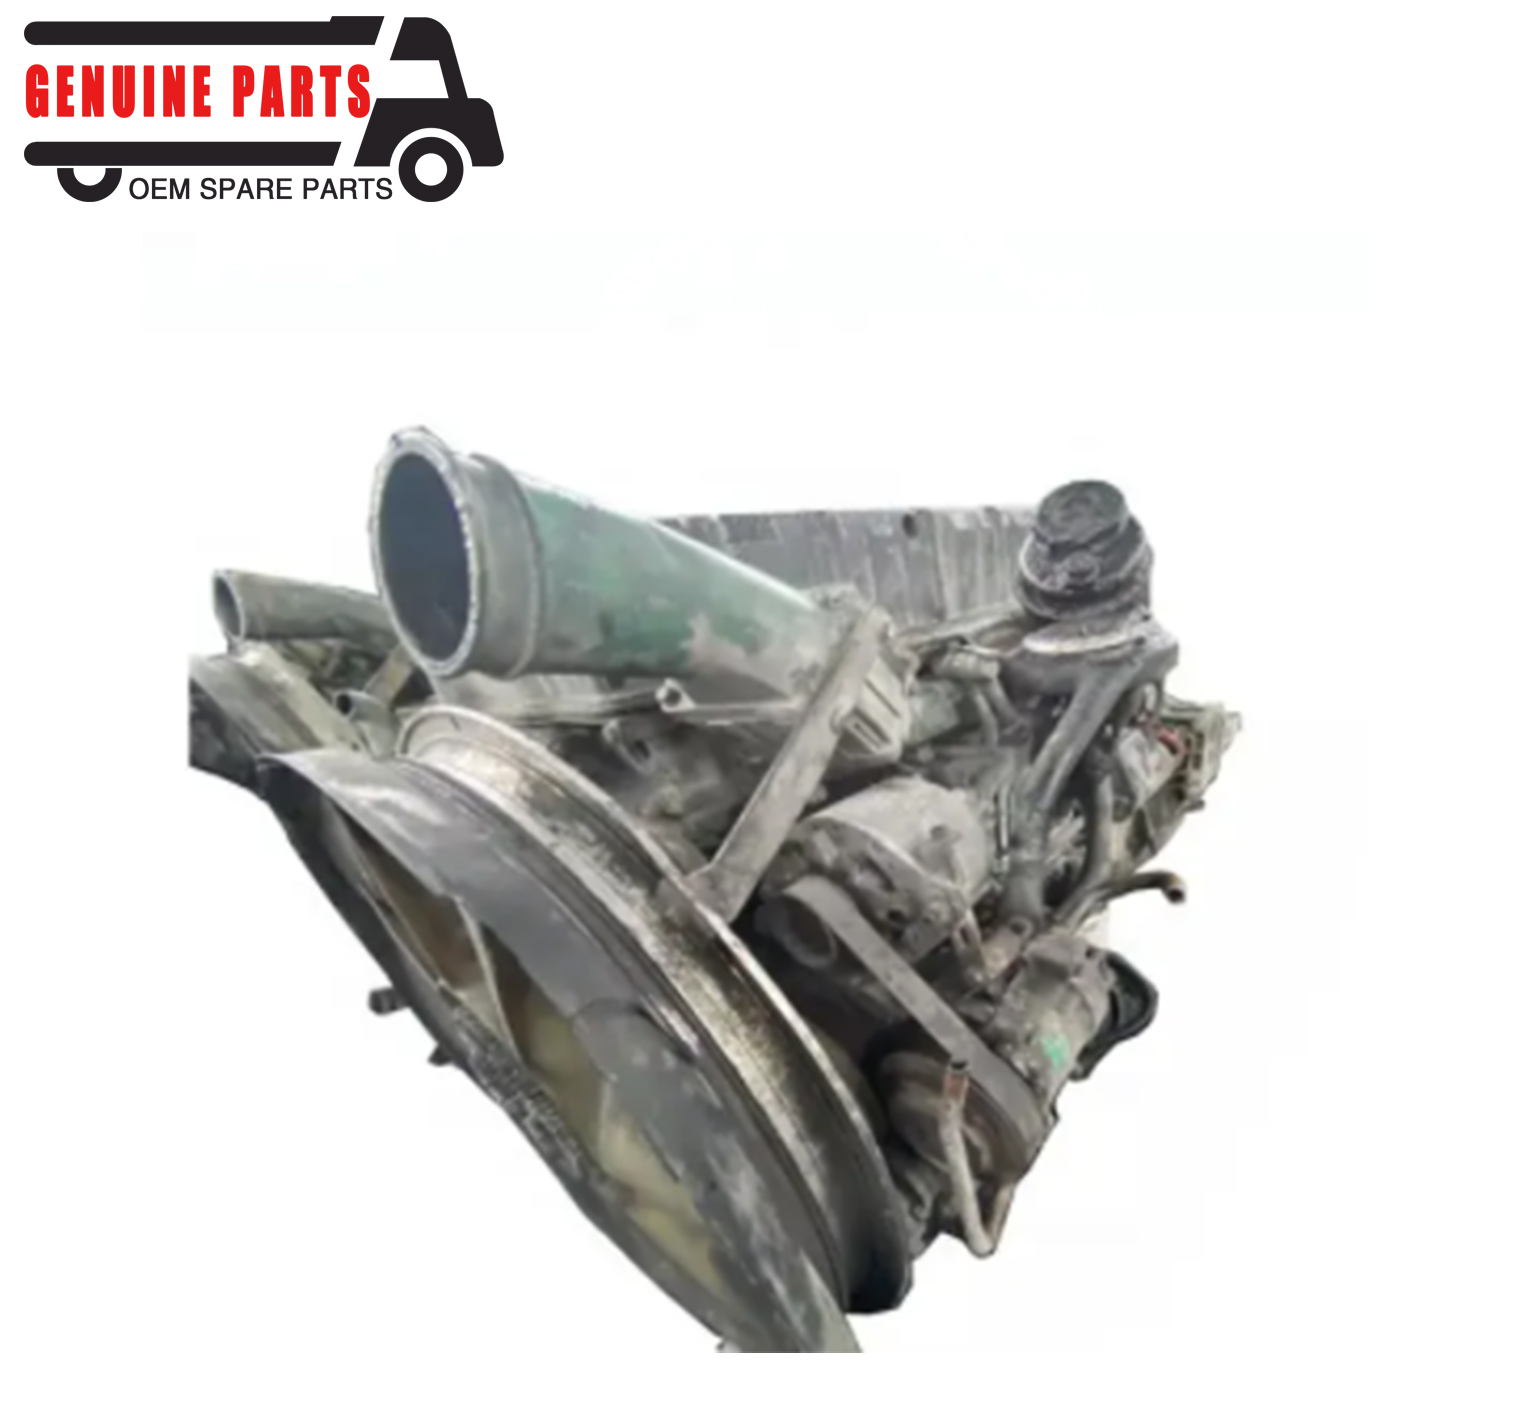 Used EURO 3 Engine Assy for VOLVO D12 12141CC used Truck diesel engine